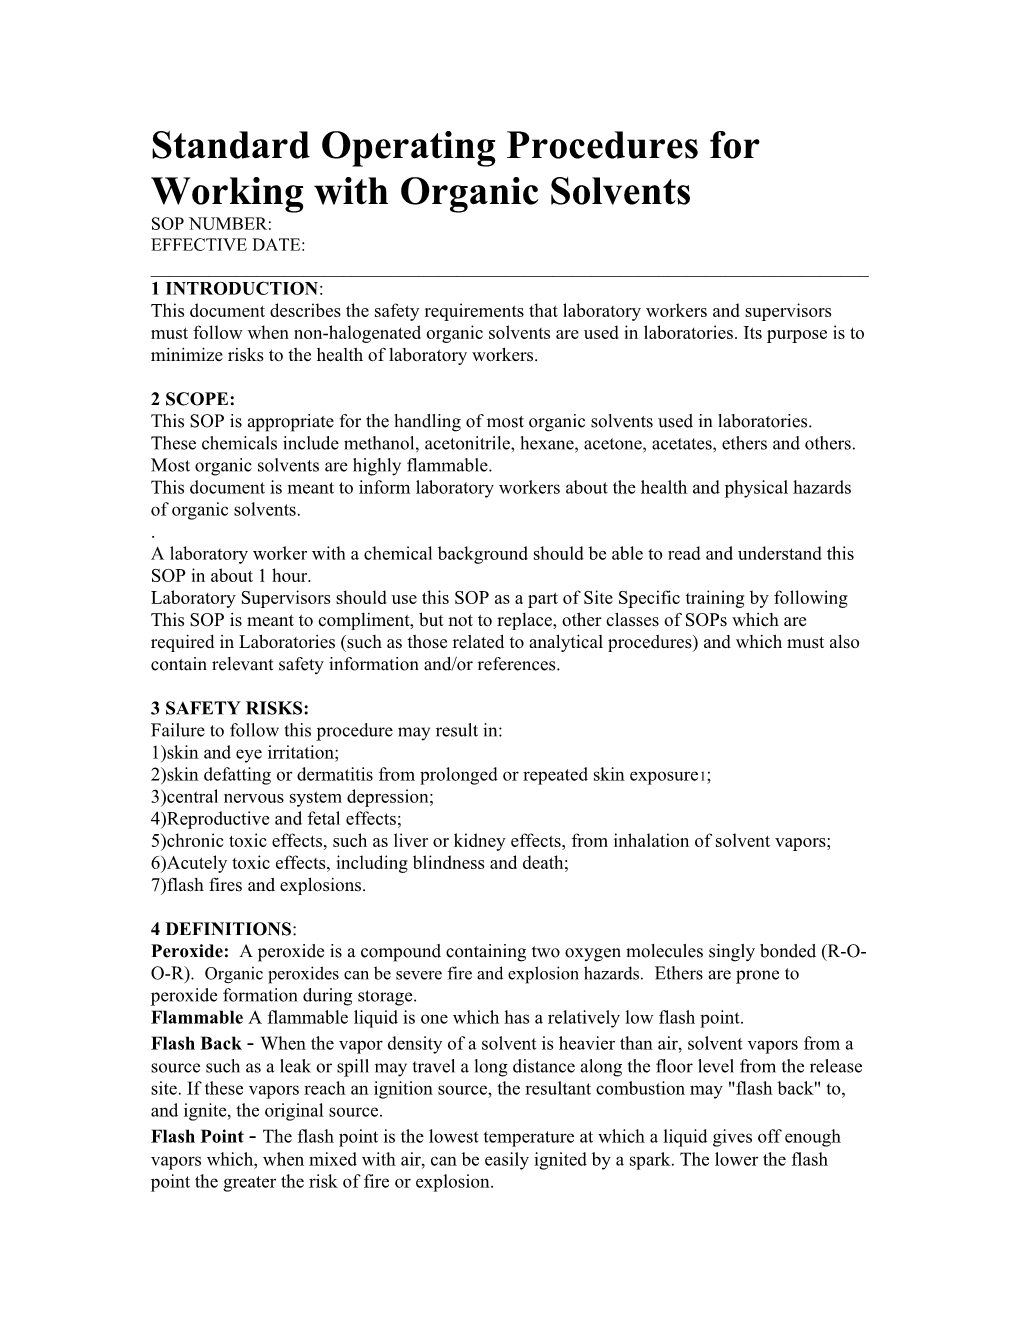 Standard Operating Procedures for Working with Organic Solvents